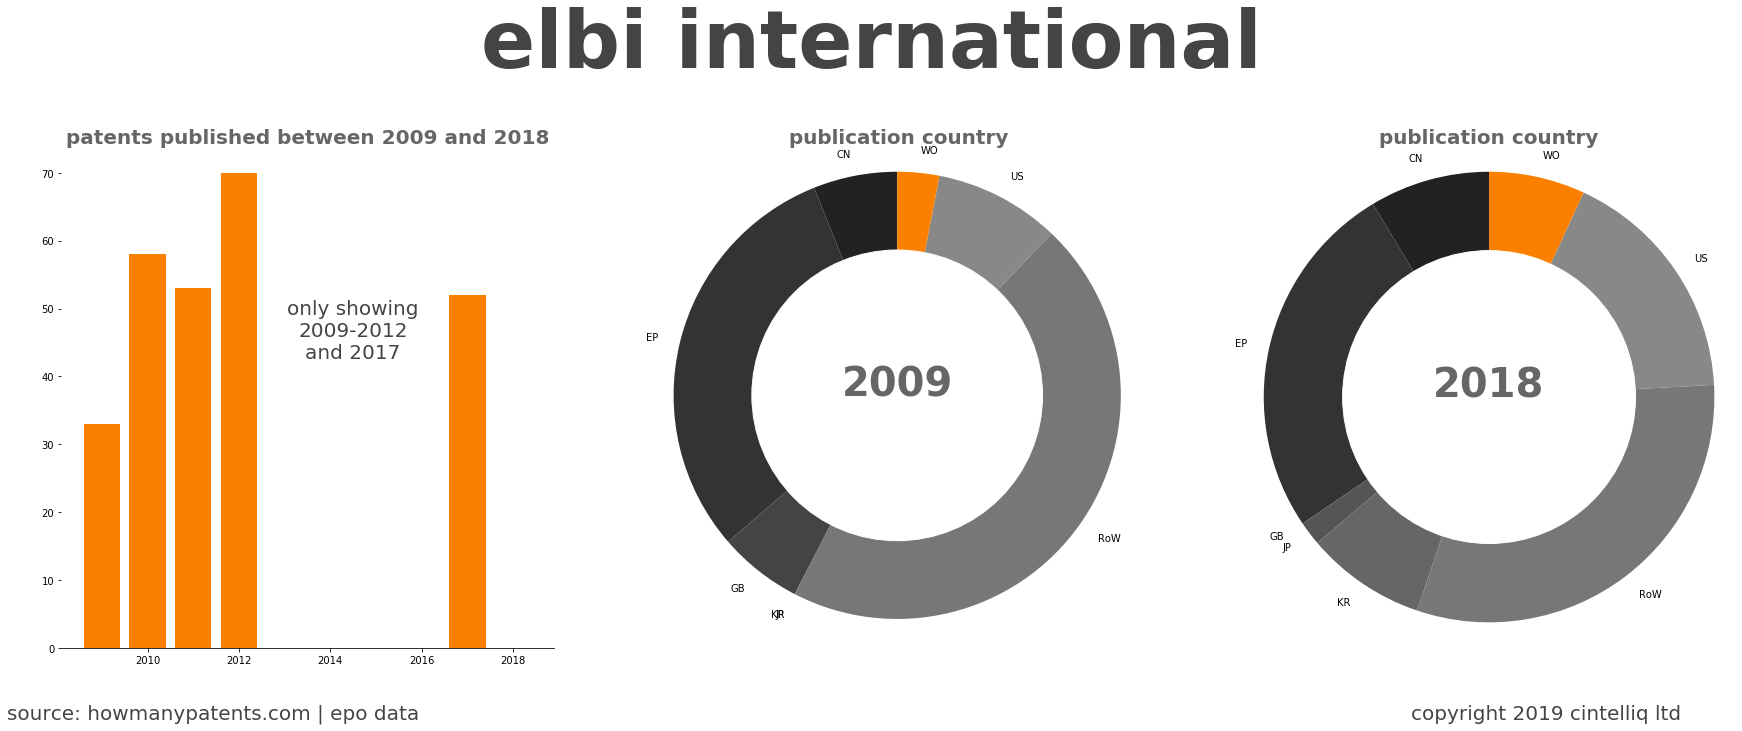 summary of patents for Elbi International